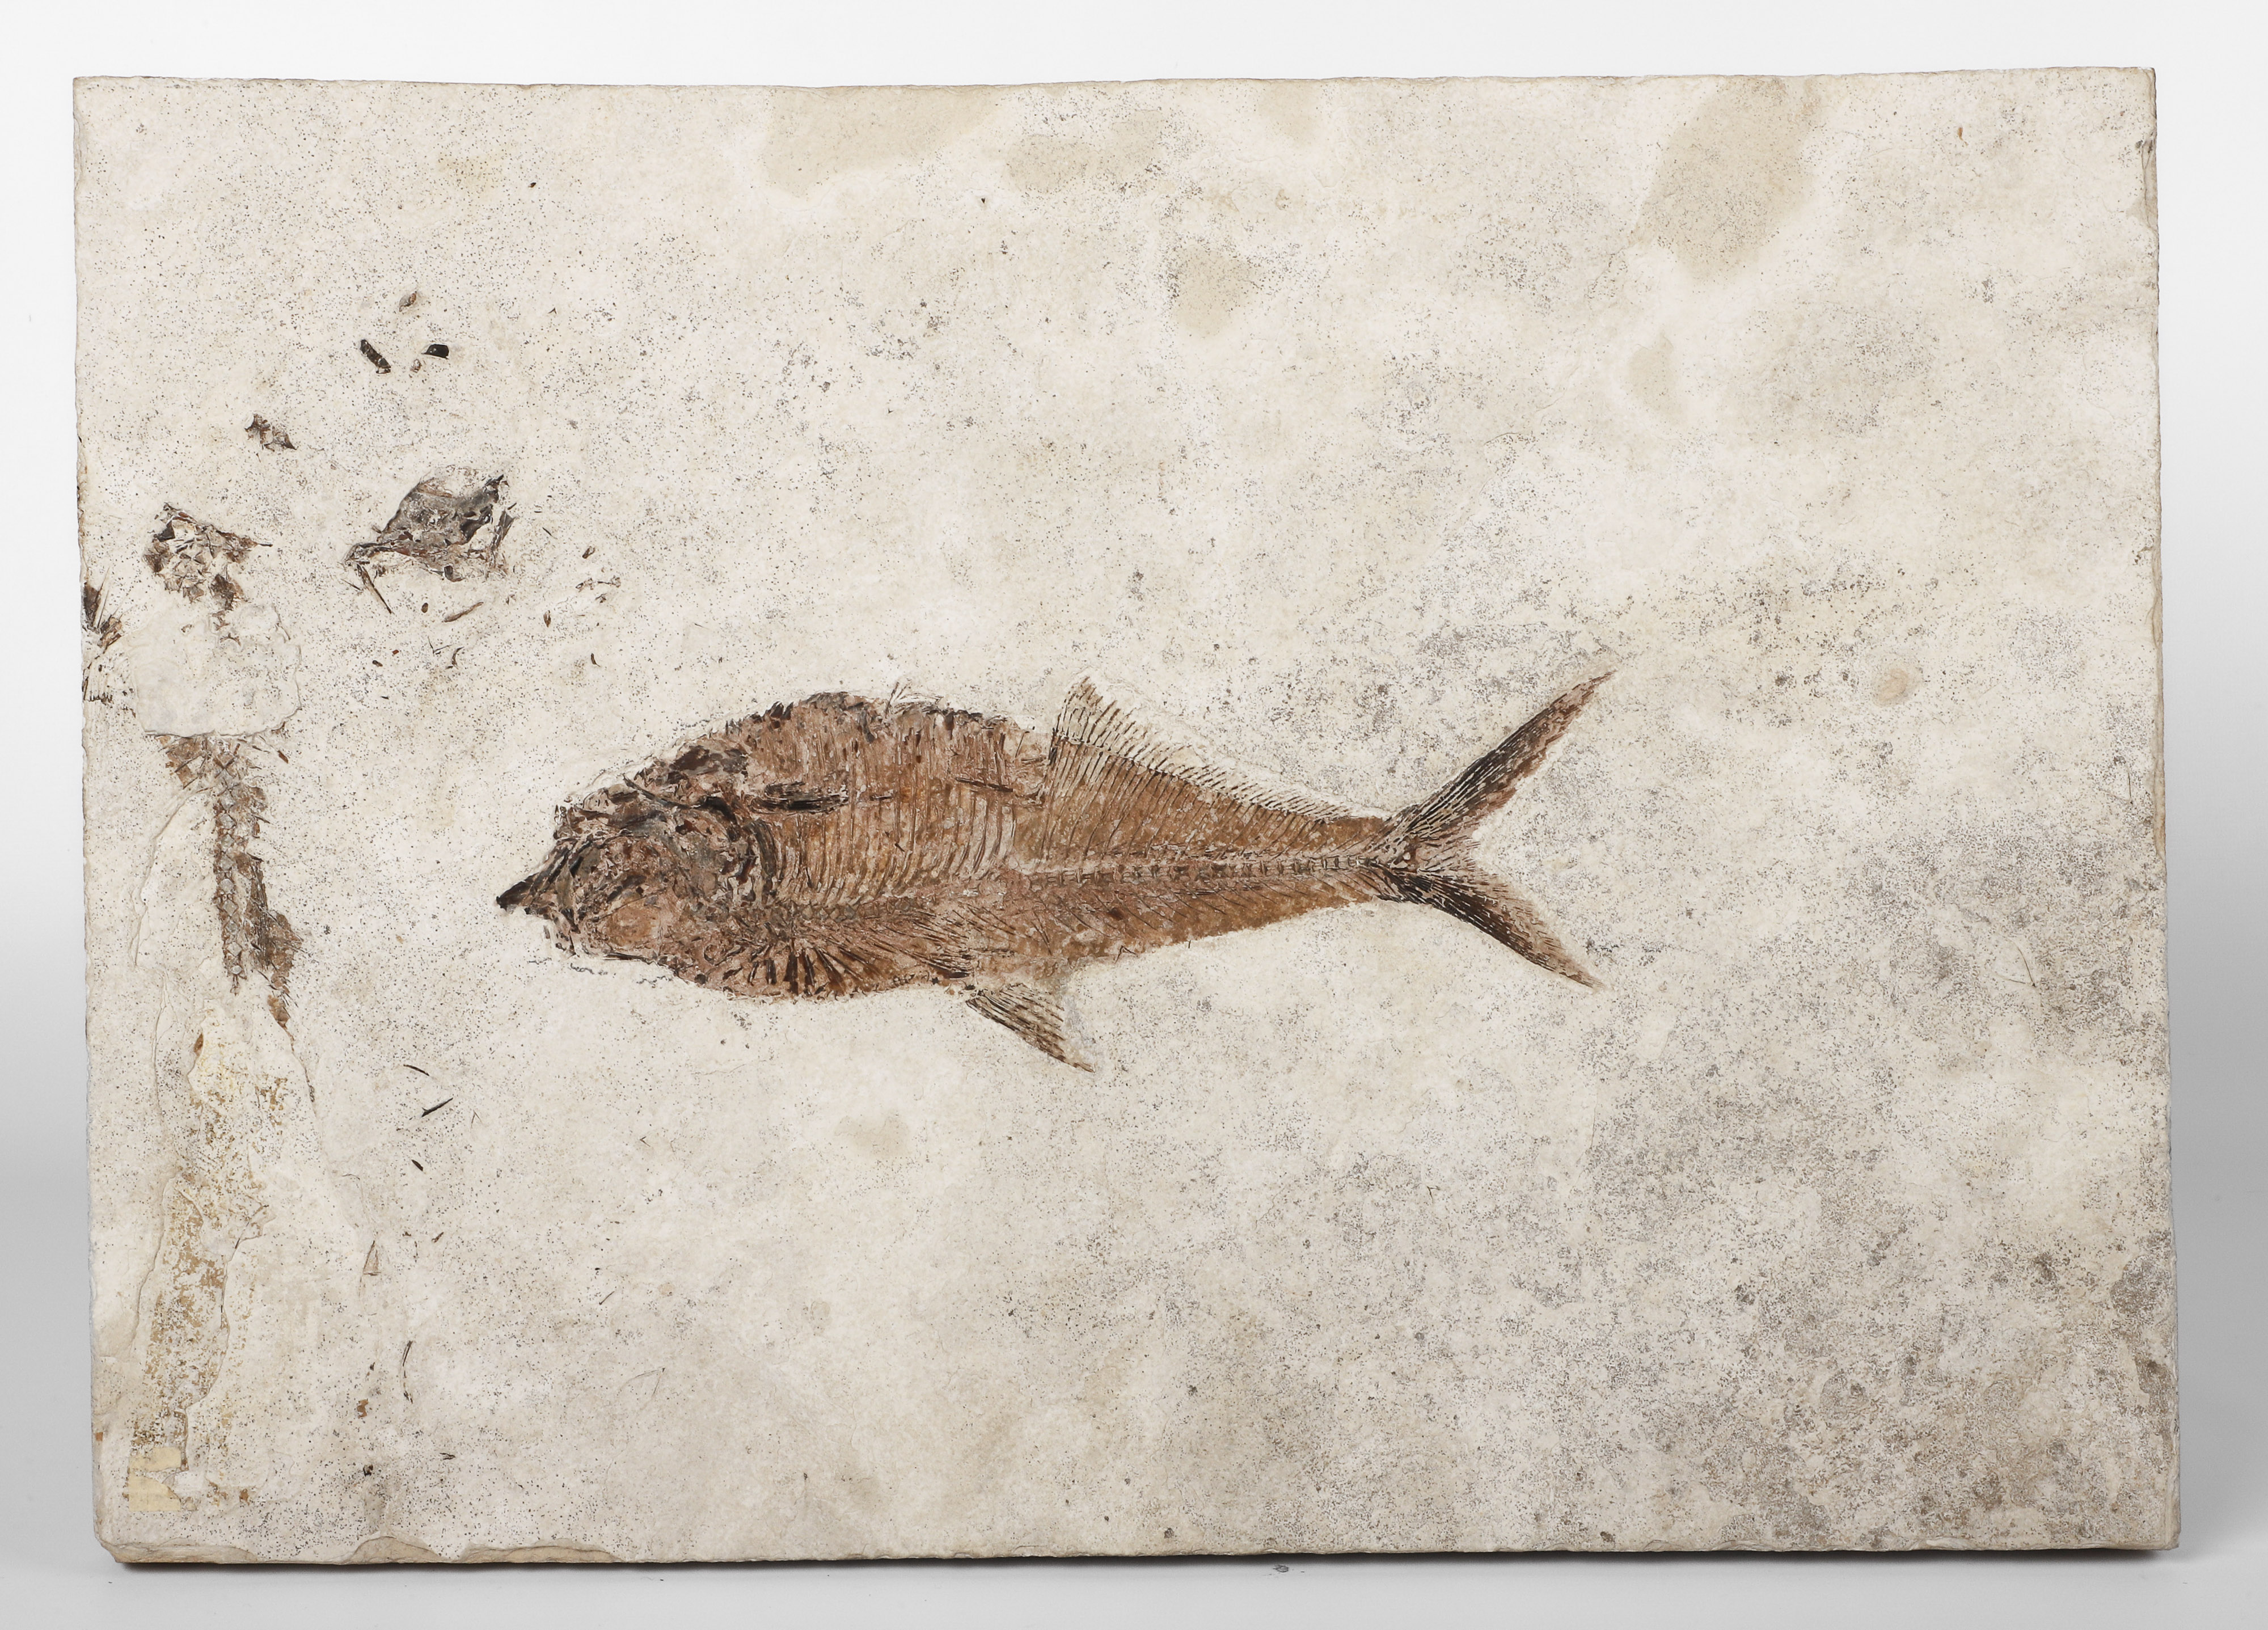 A Large Fossil of a Fish Diplomystus 3b142a